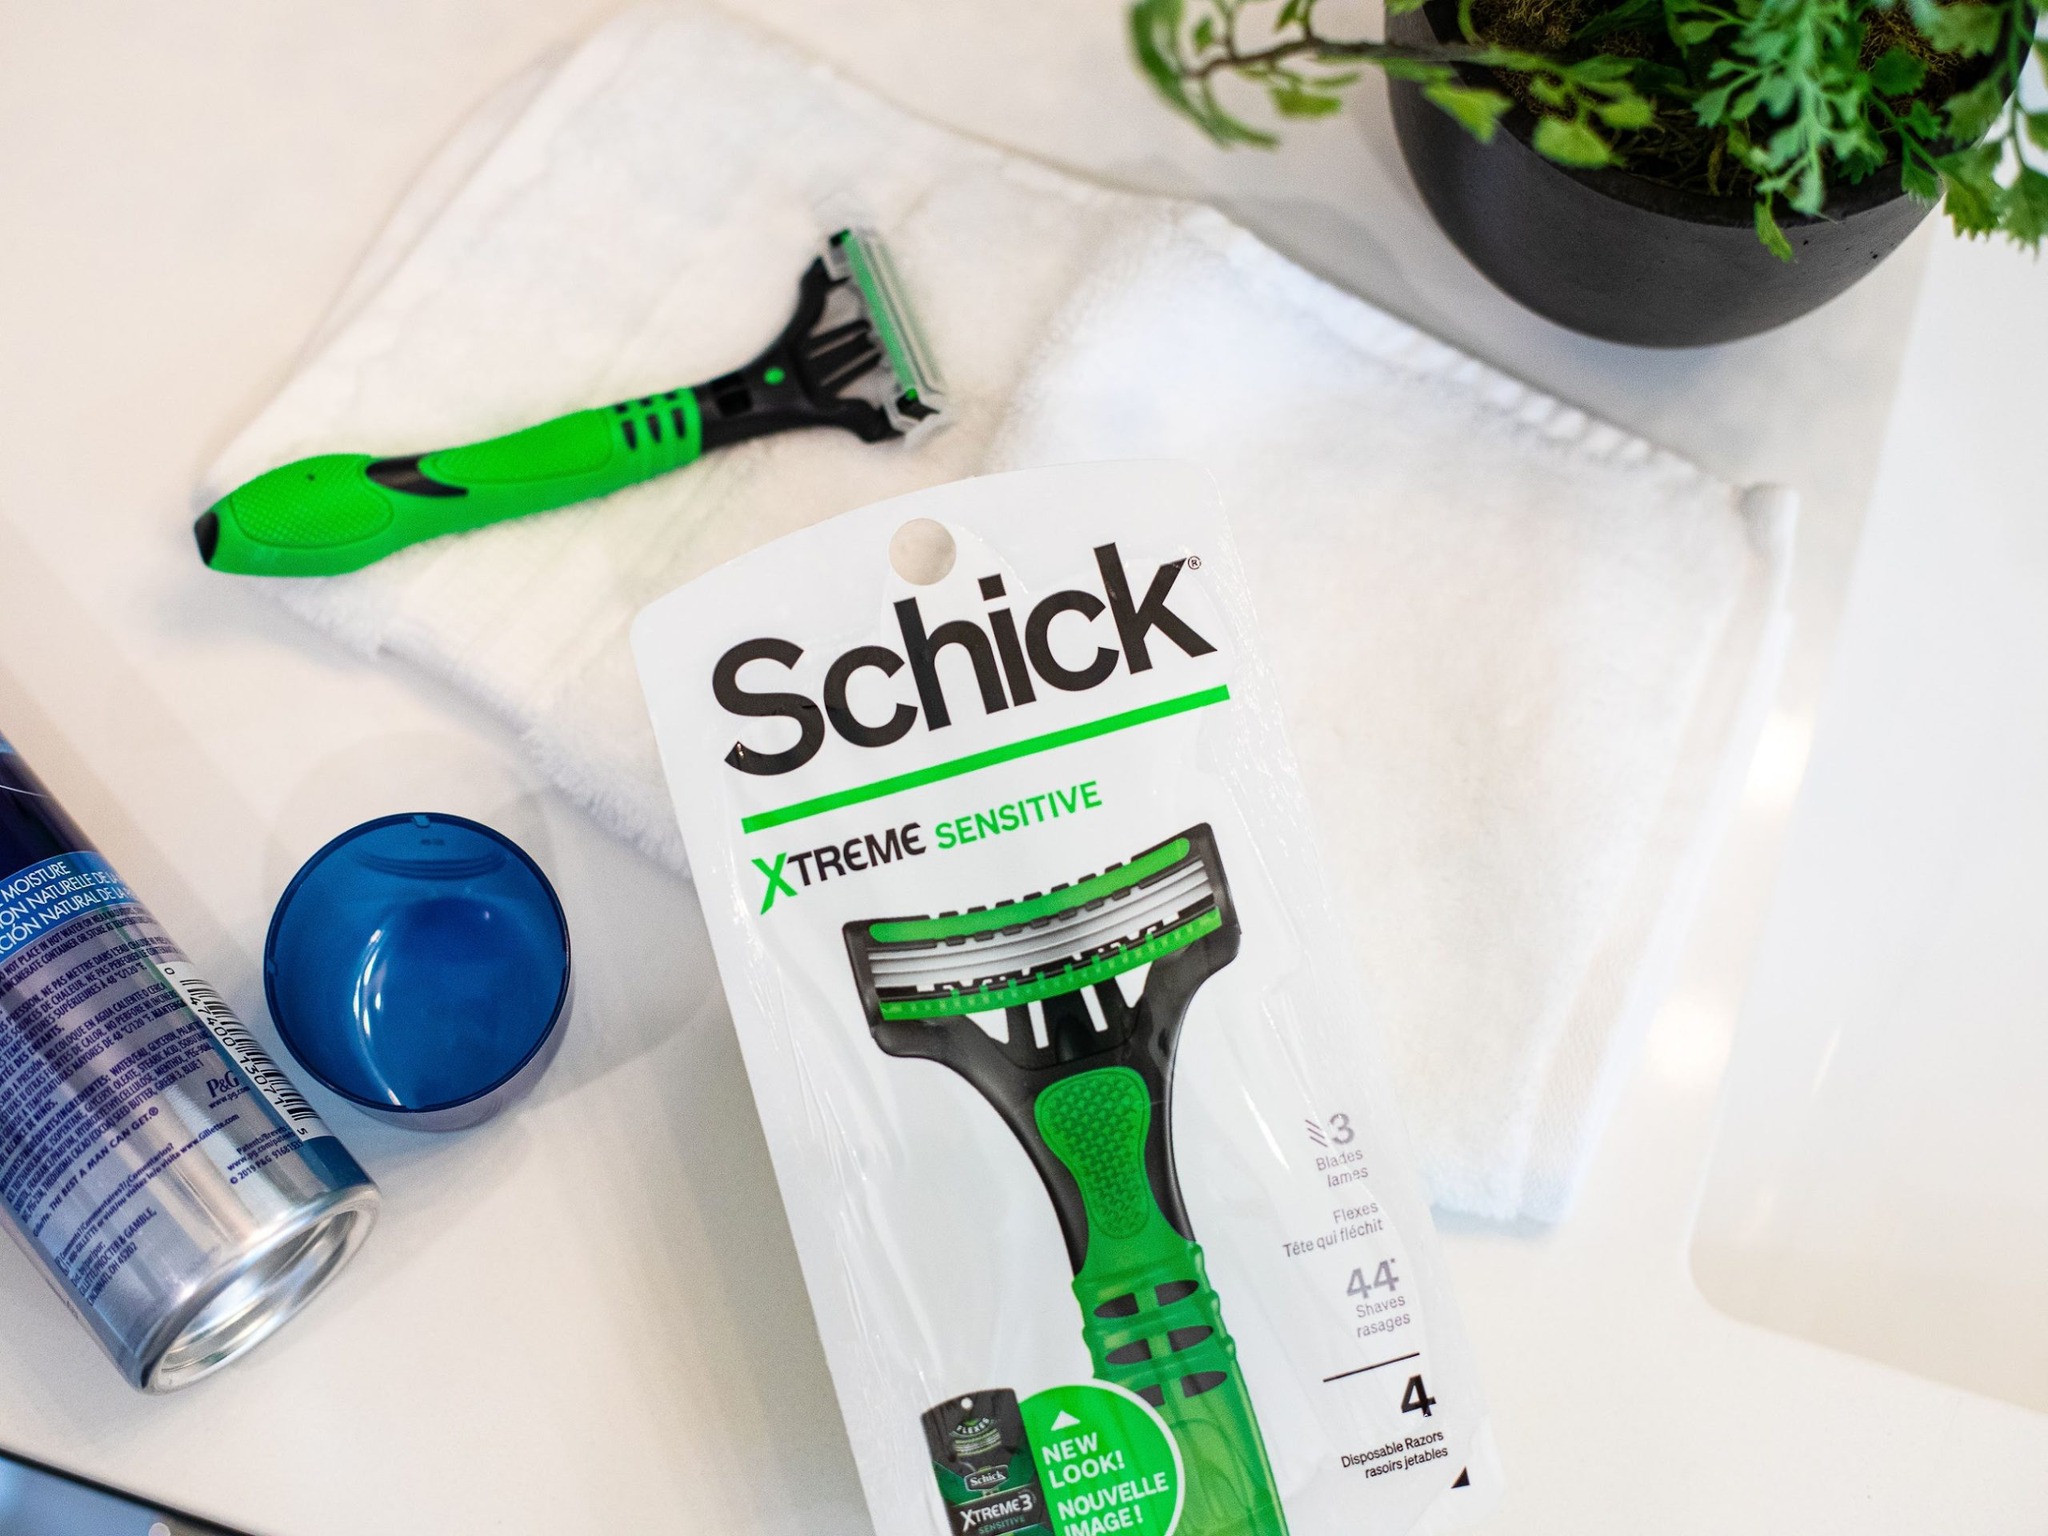 Schick Disposable Razors As Low As 99¢ At Kroger